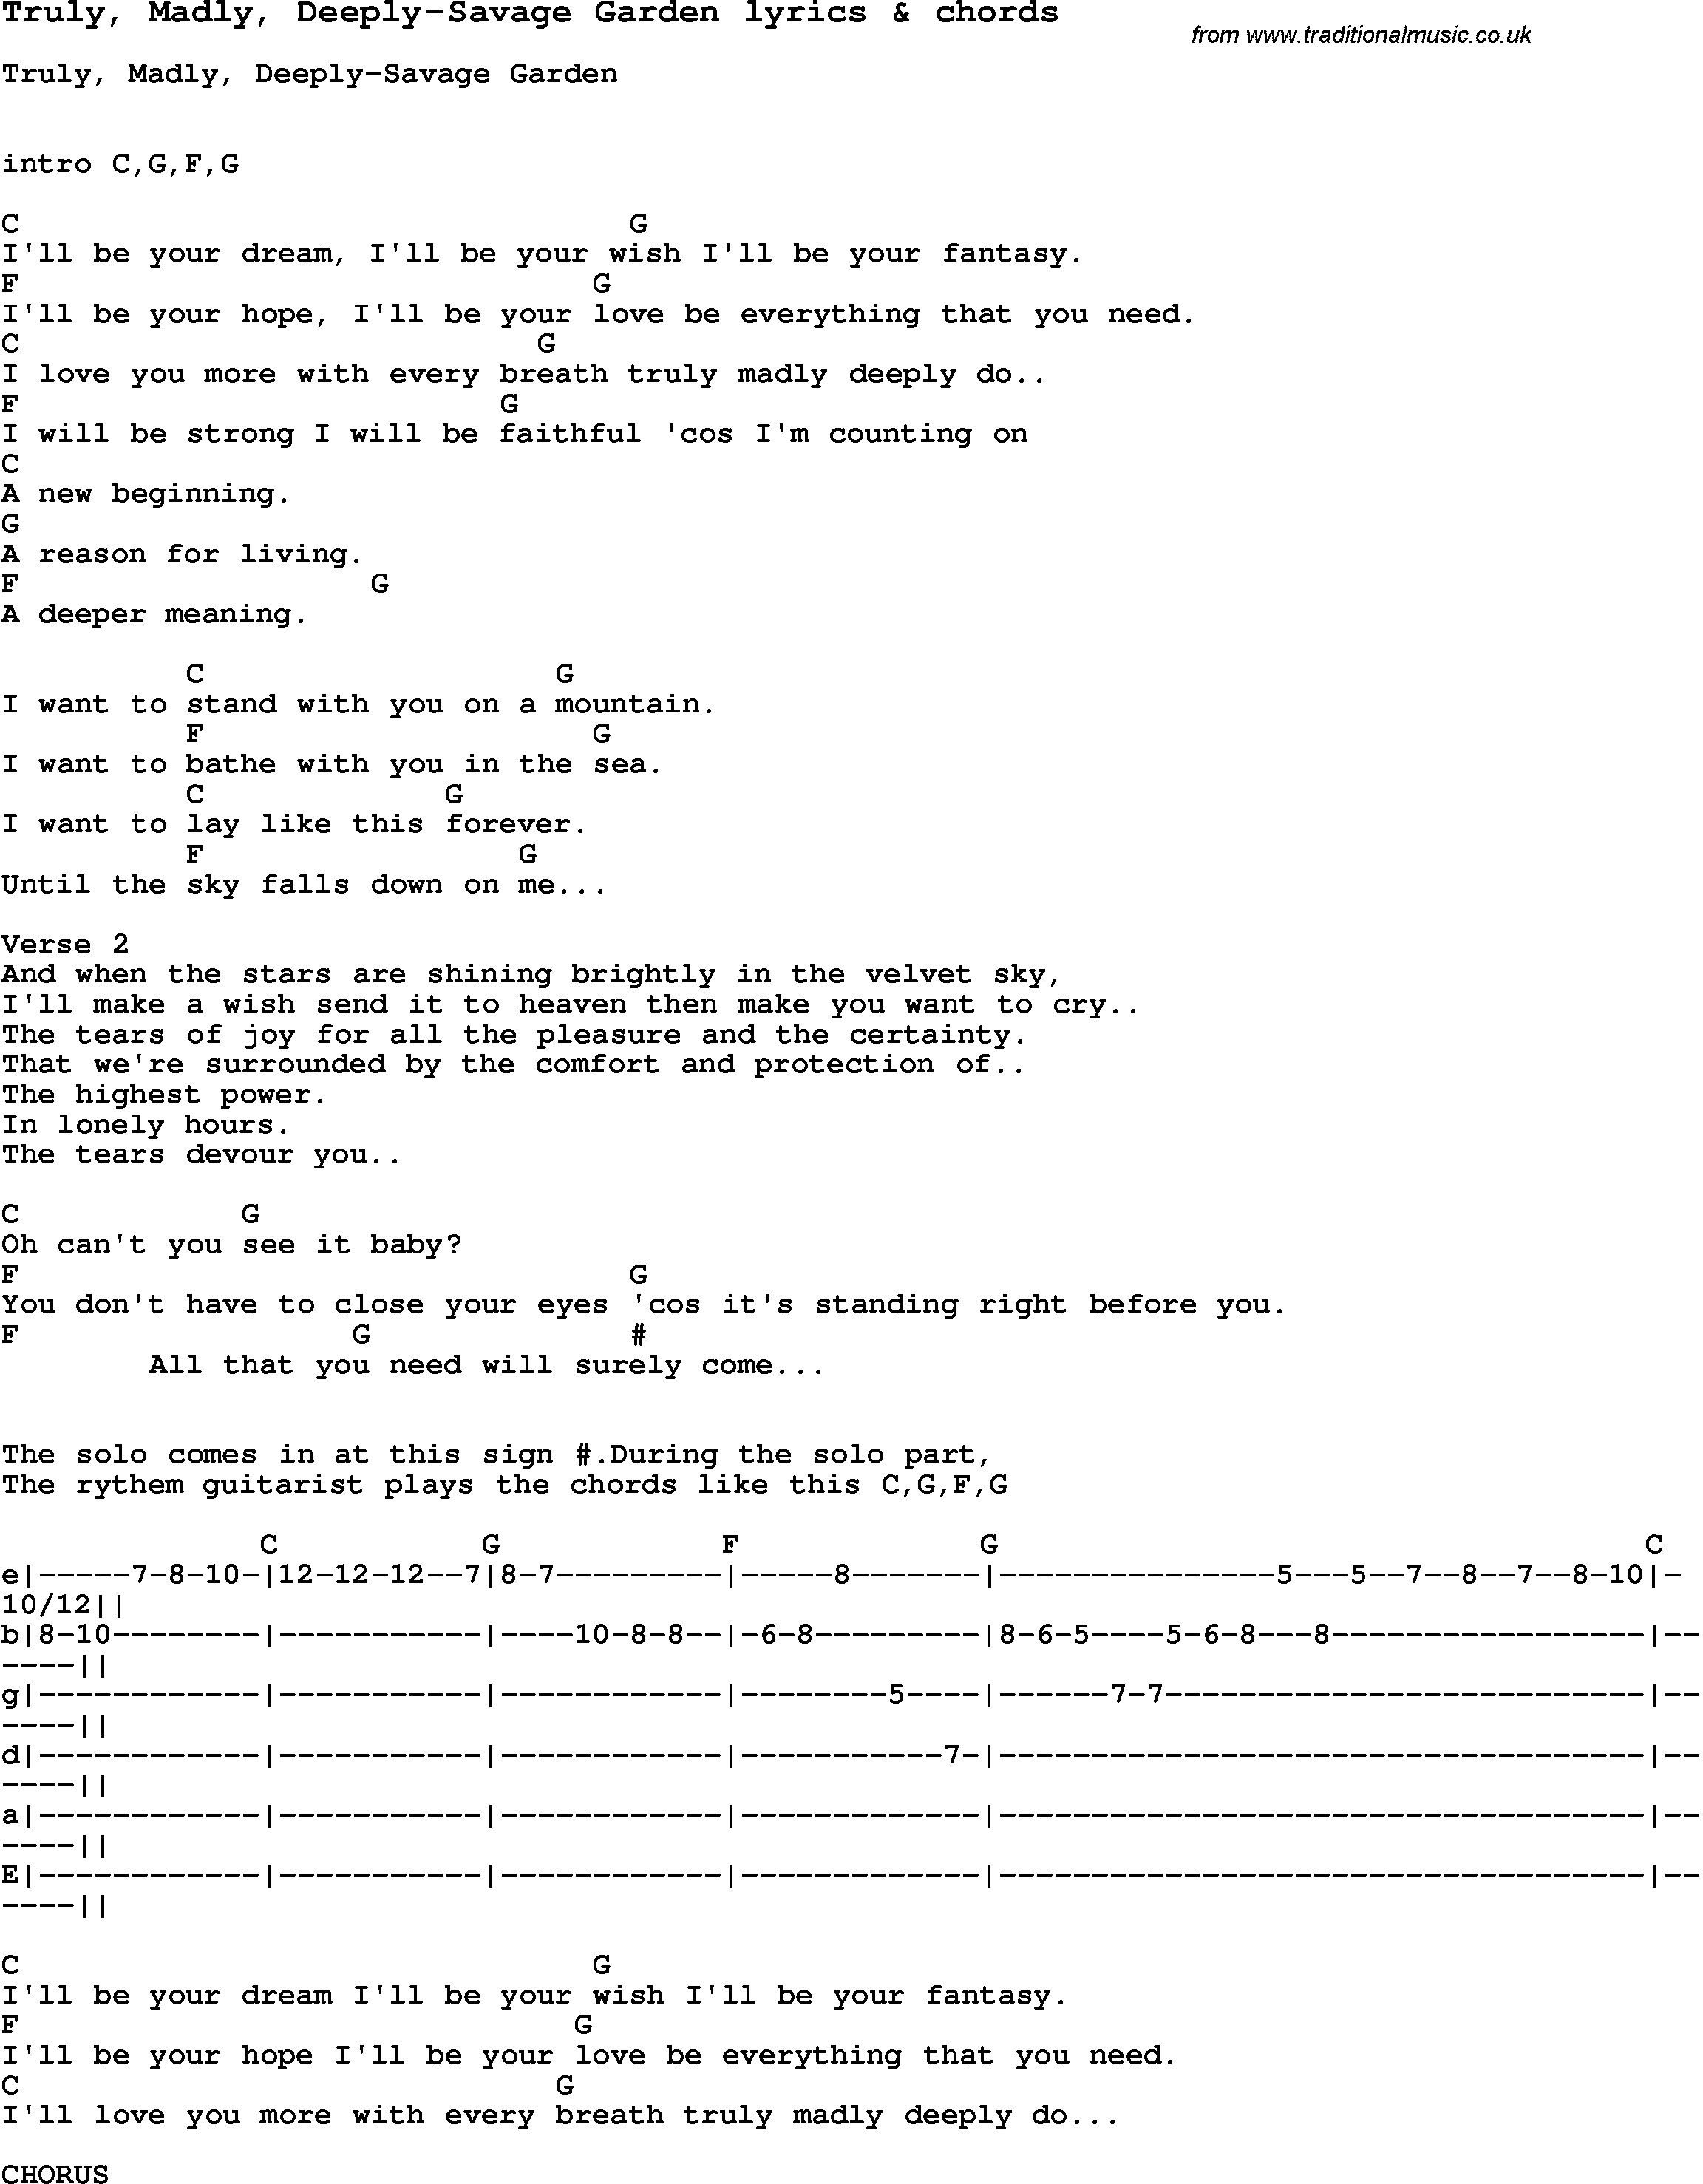 Love Song Lyrics For Truly Madly Deeply Savage Garden With Chords